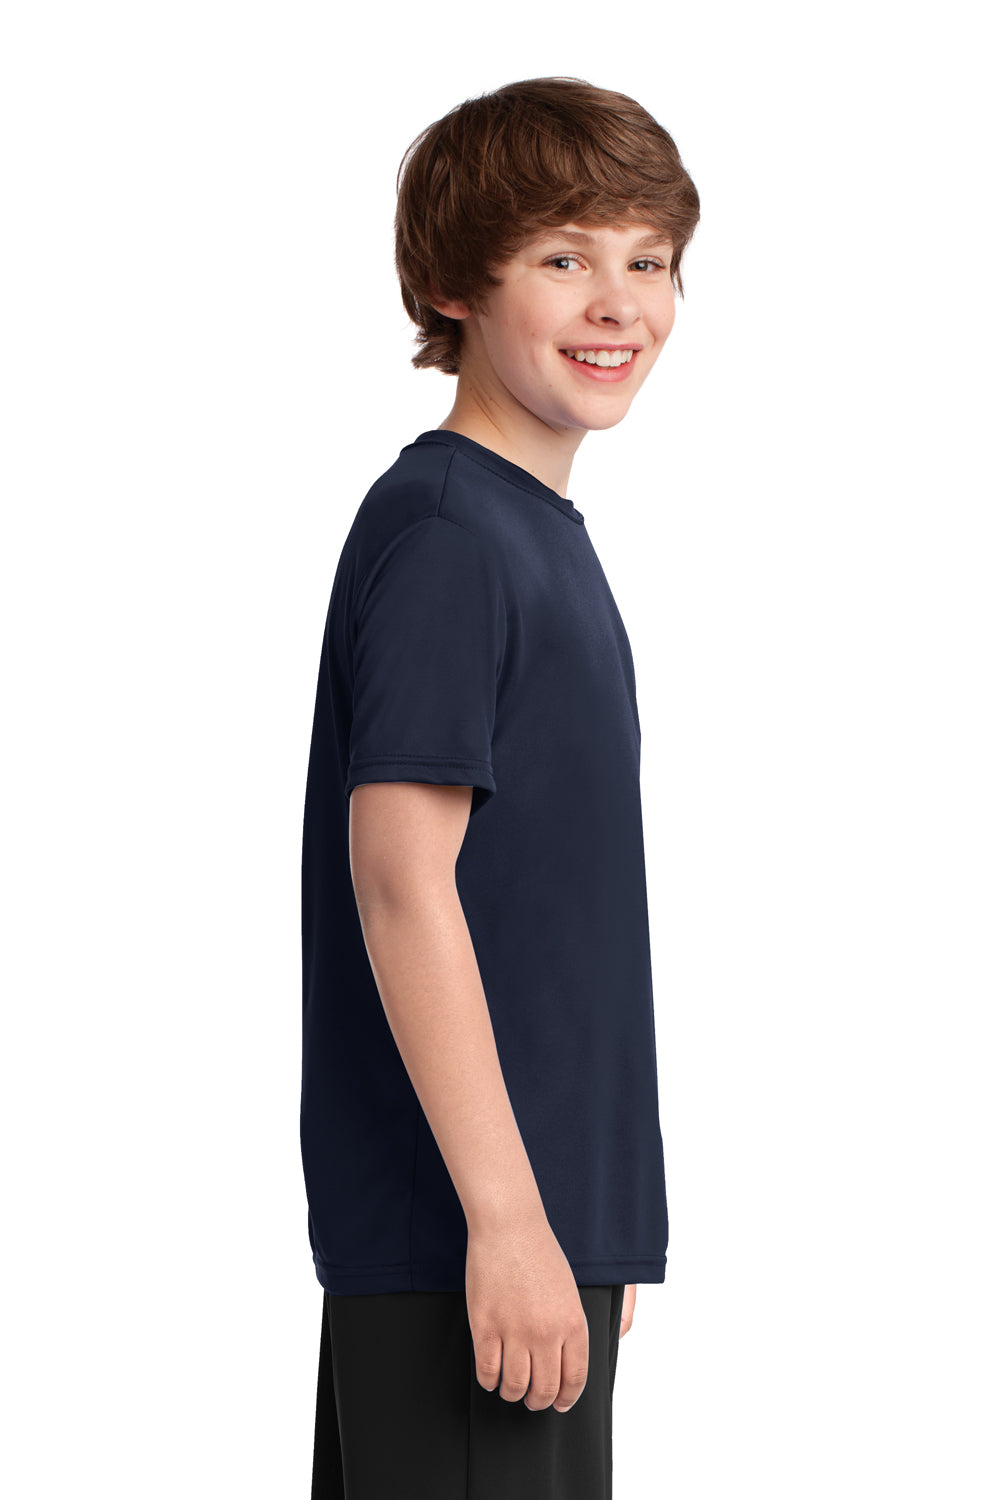 Port & Company PC380Y Youth Dry Zone Performance Moisture Wicking Short Sleeve Crewneck T-Shirt Navy Blue Side